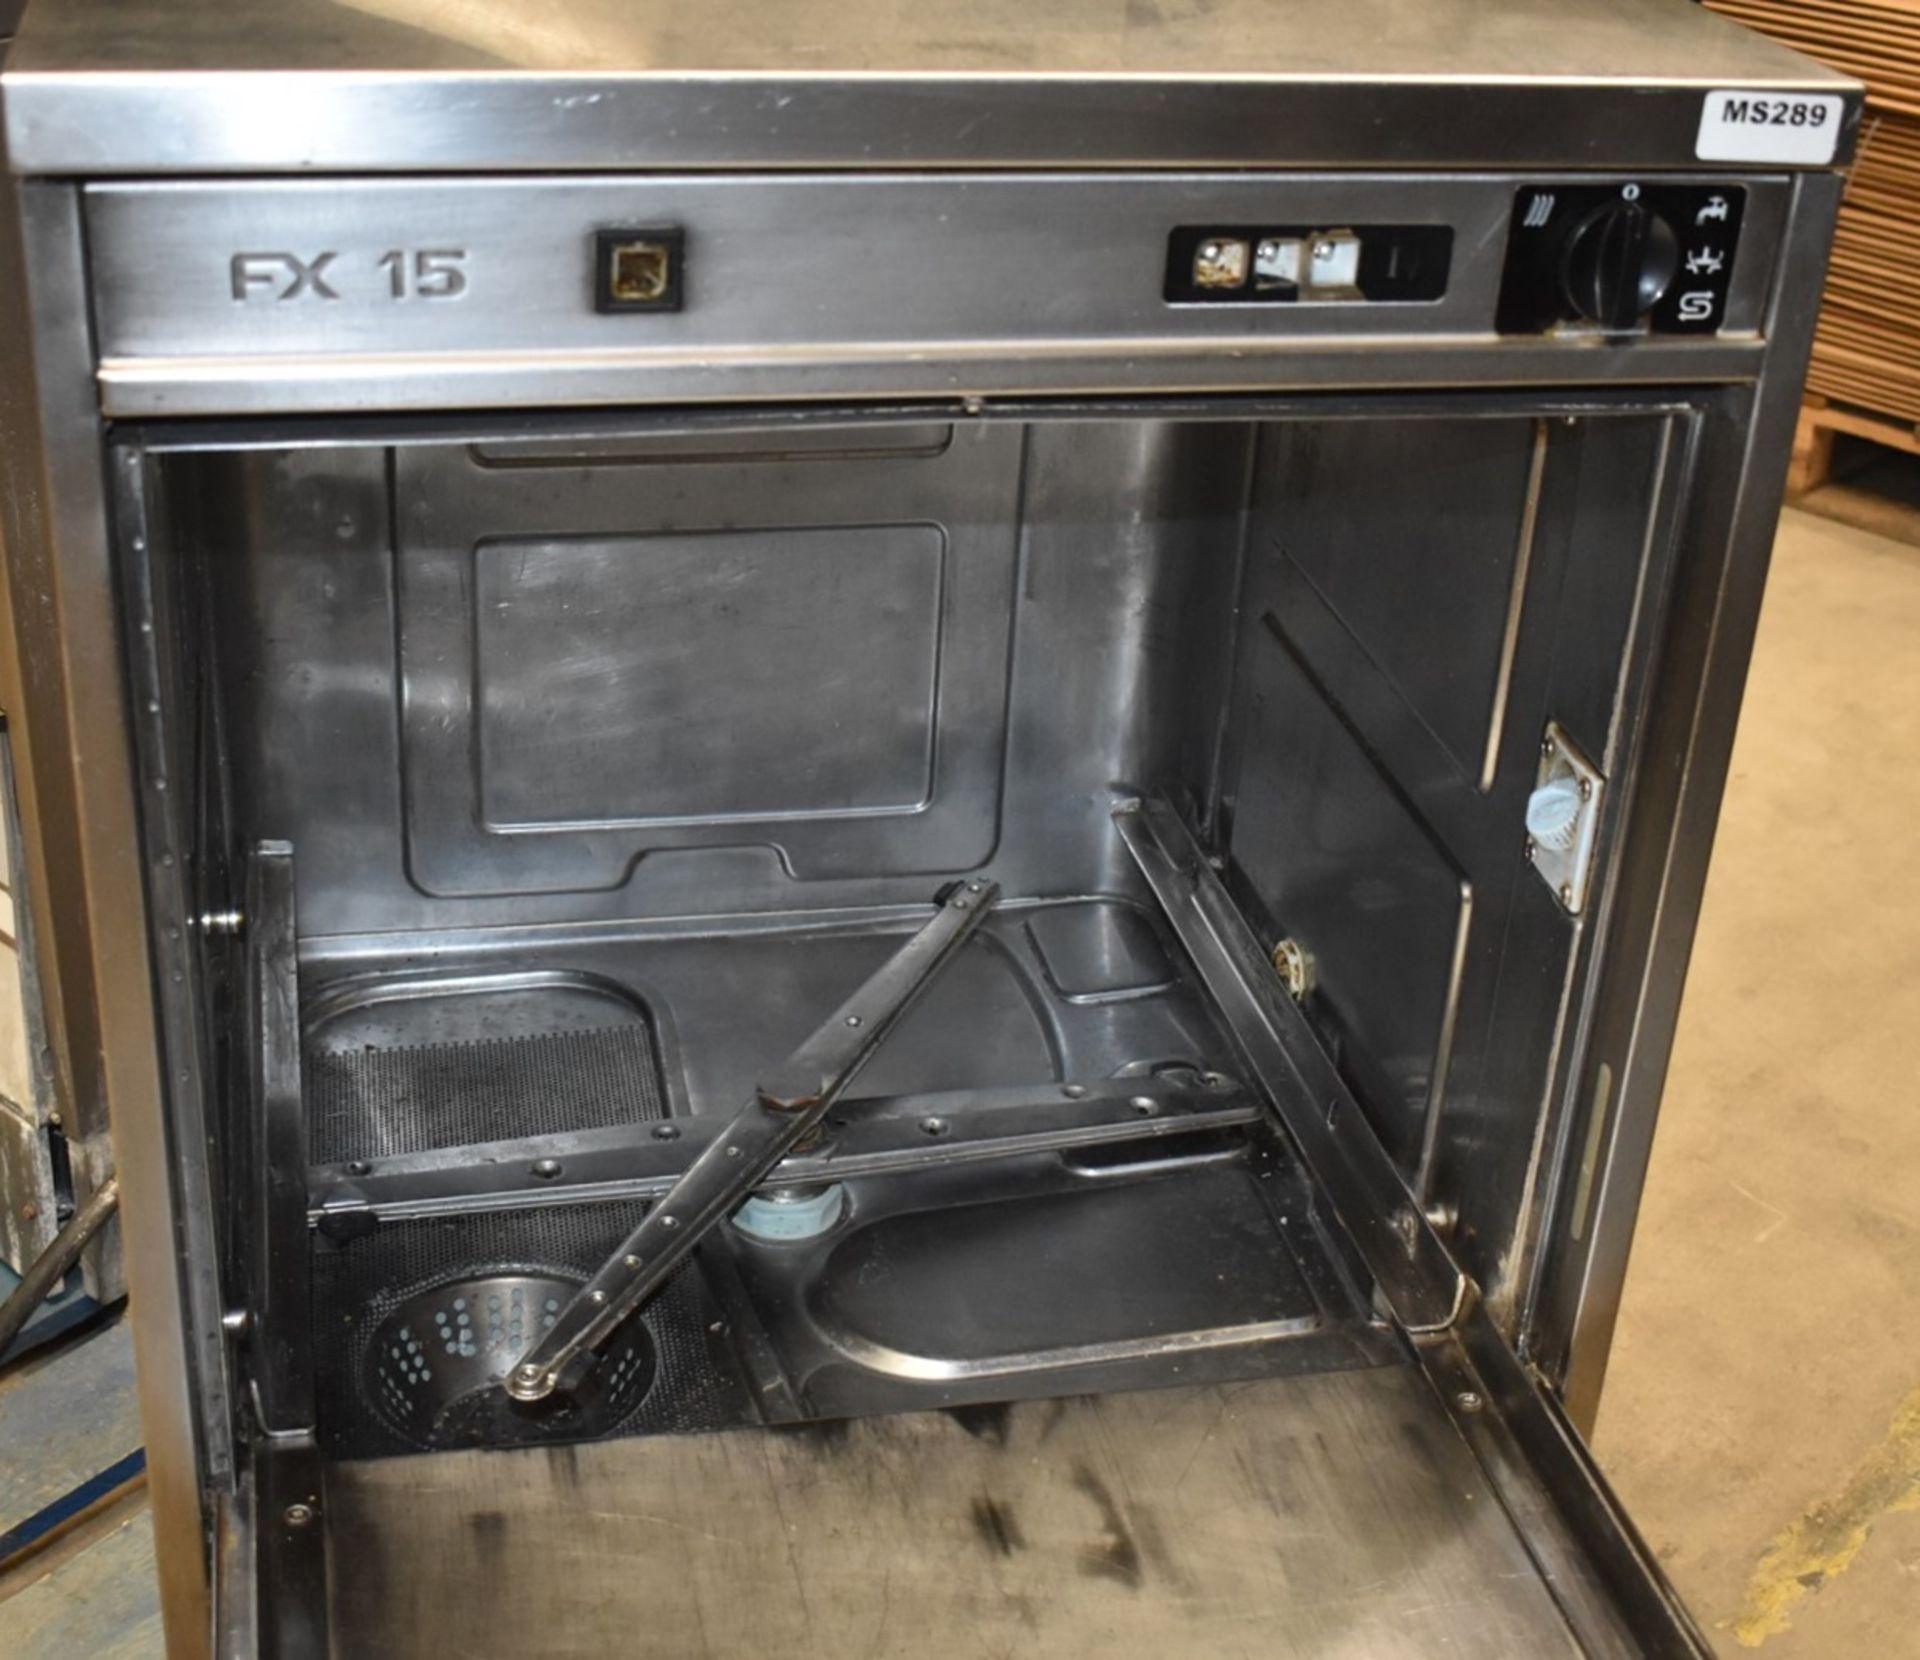 1 x Hobart FX15 Undercounter Commercial Dishwasher - Dimensions: H83 x W60 x D60 cms - Ref: MS289 - Image 4 of 5